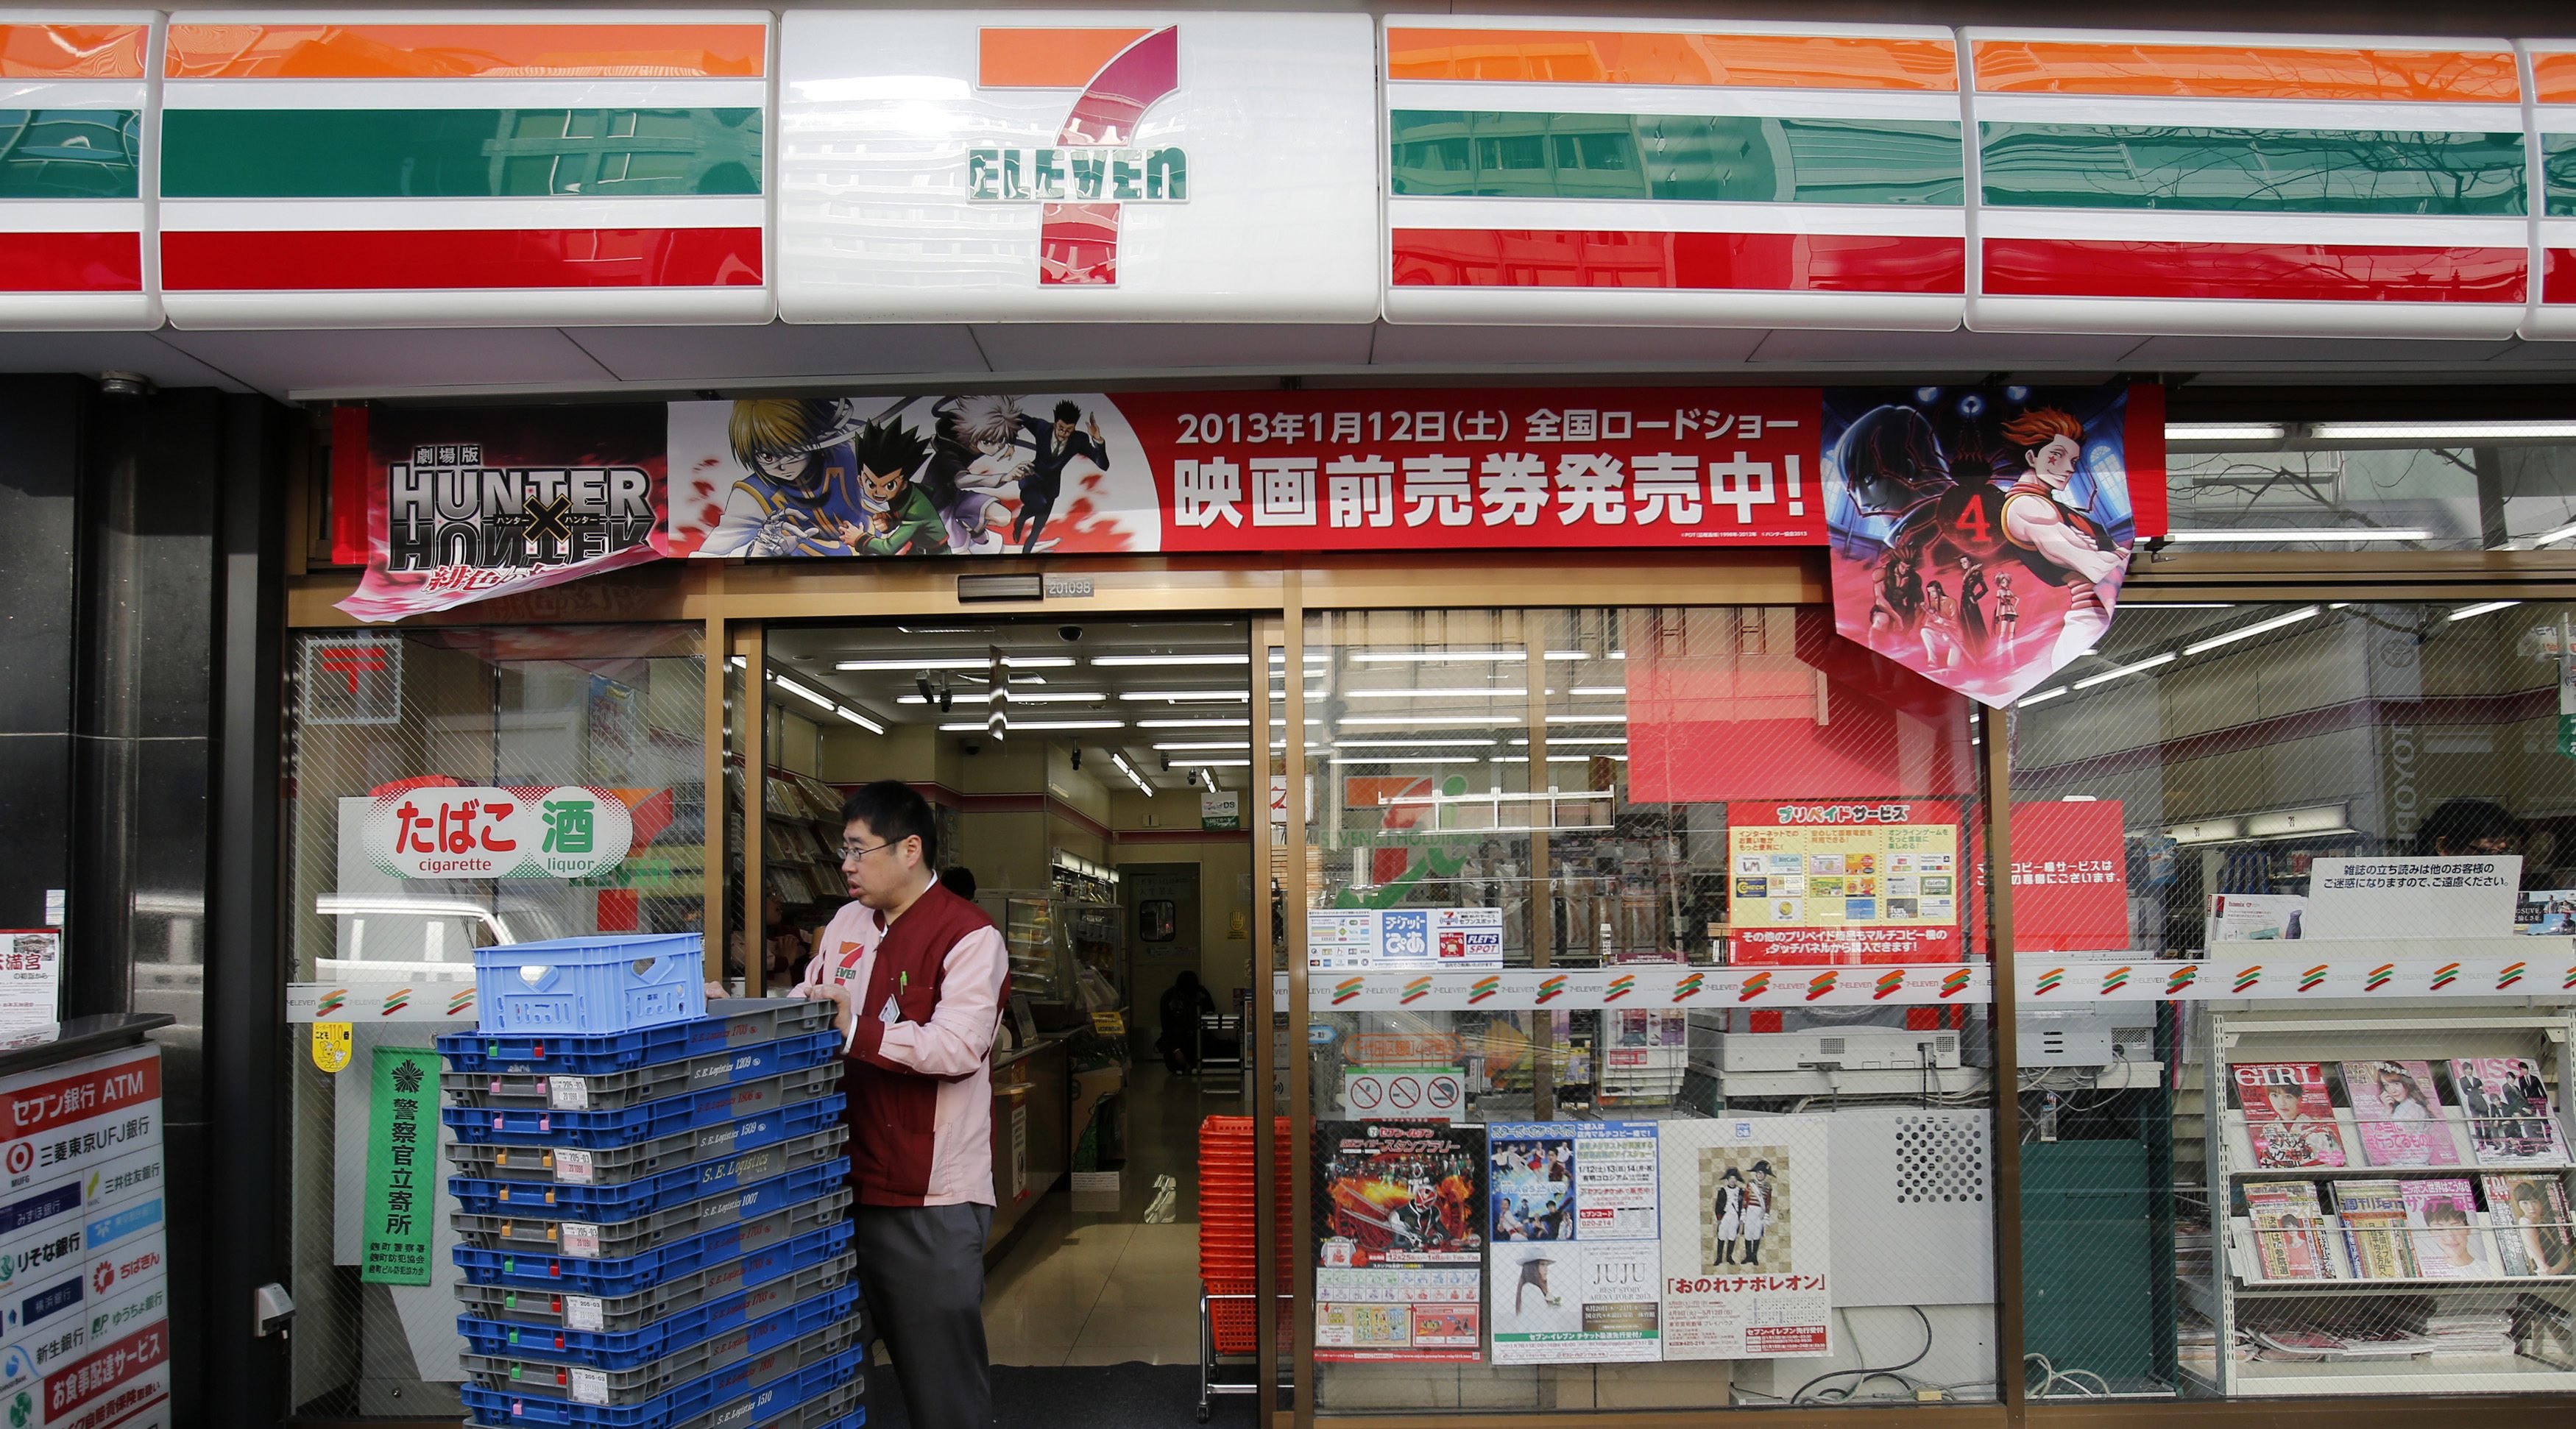 7-Eleven anh 2